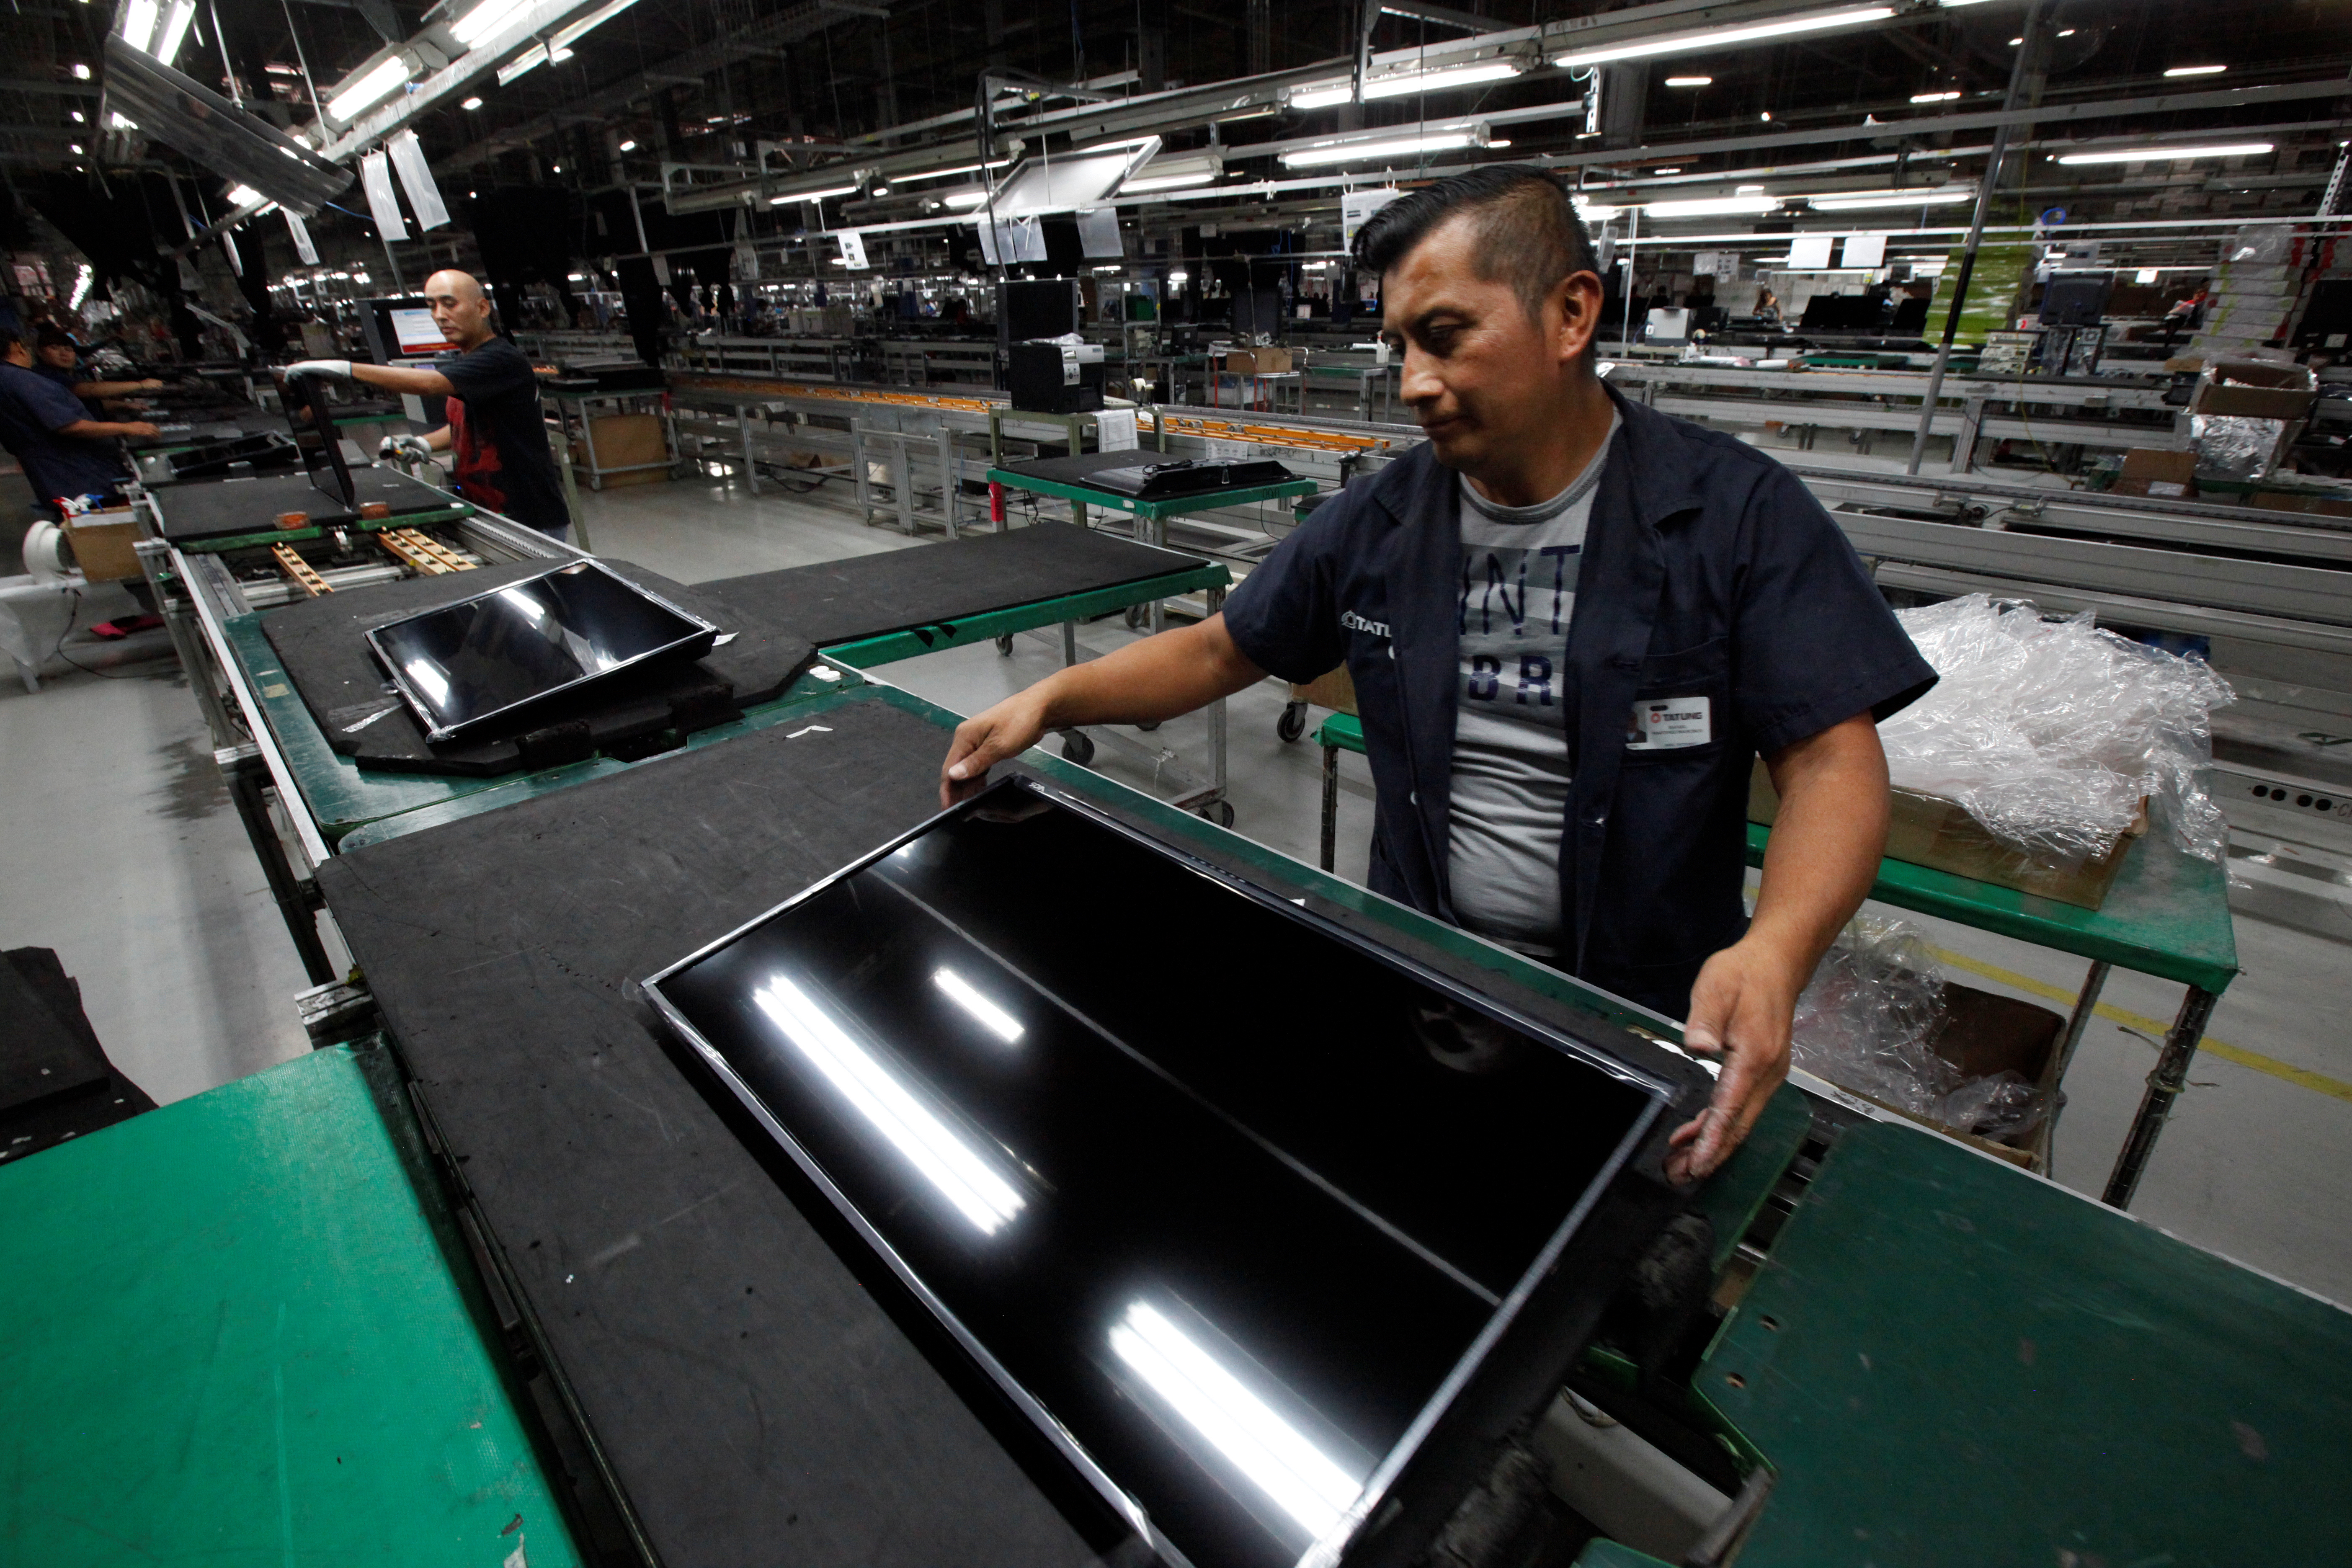 An employee works at an LED TV assembly line at a factory that exports to the U.S. in Ciudad Juarez